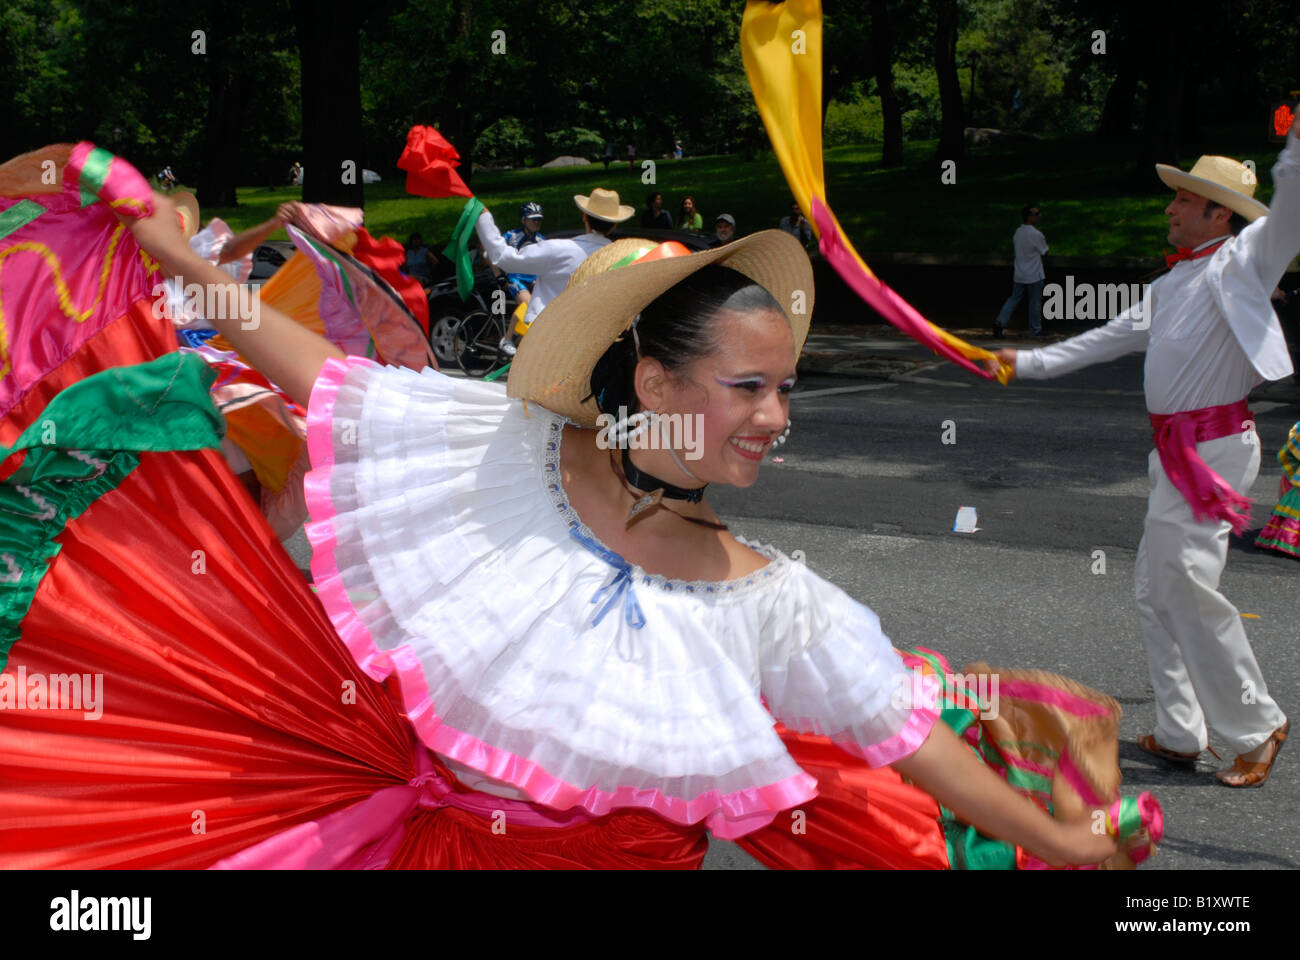 Colombian folk dancers perform in a flower parade on Central Park West